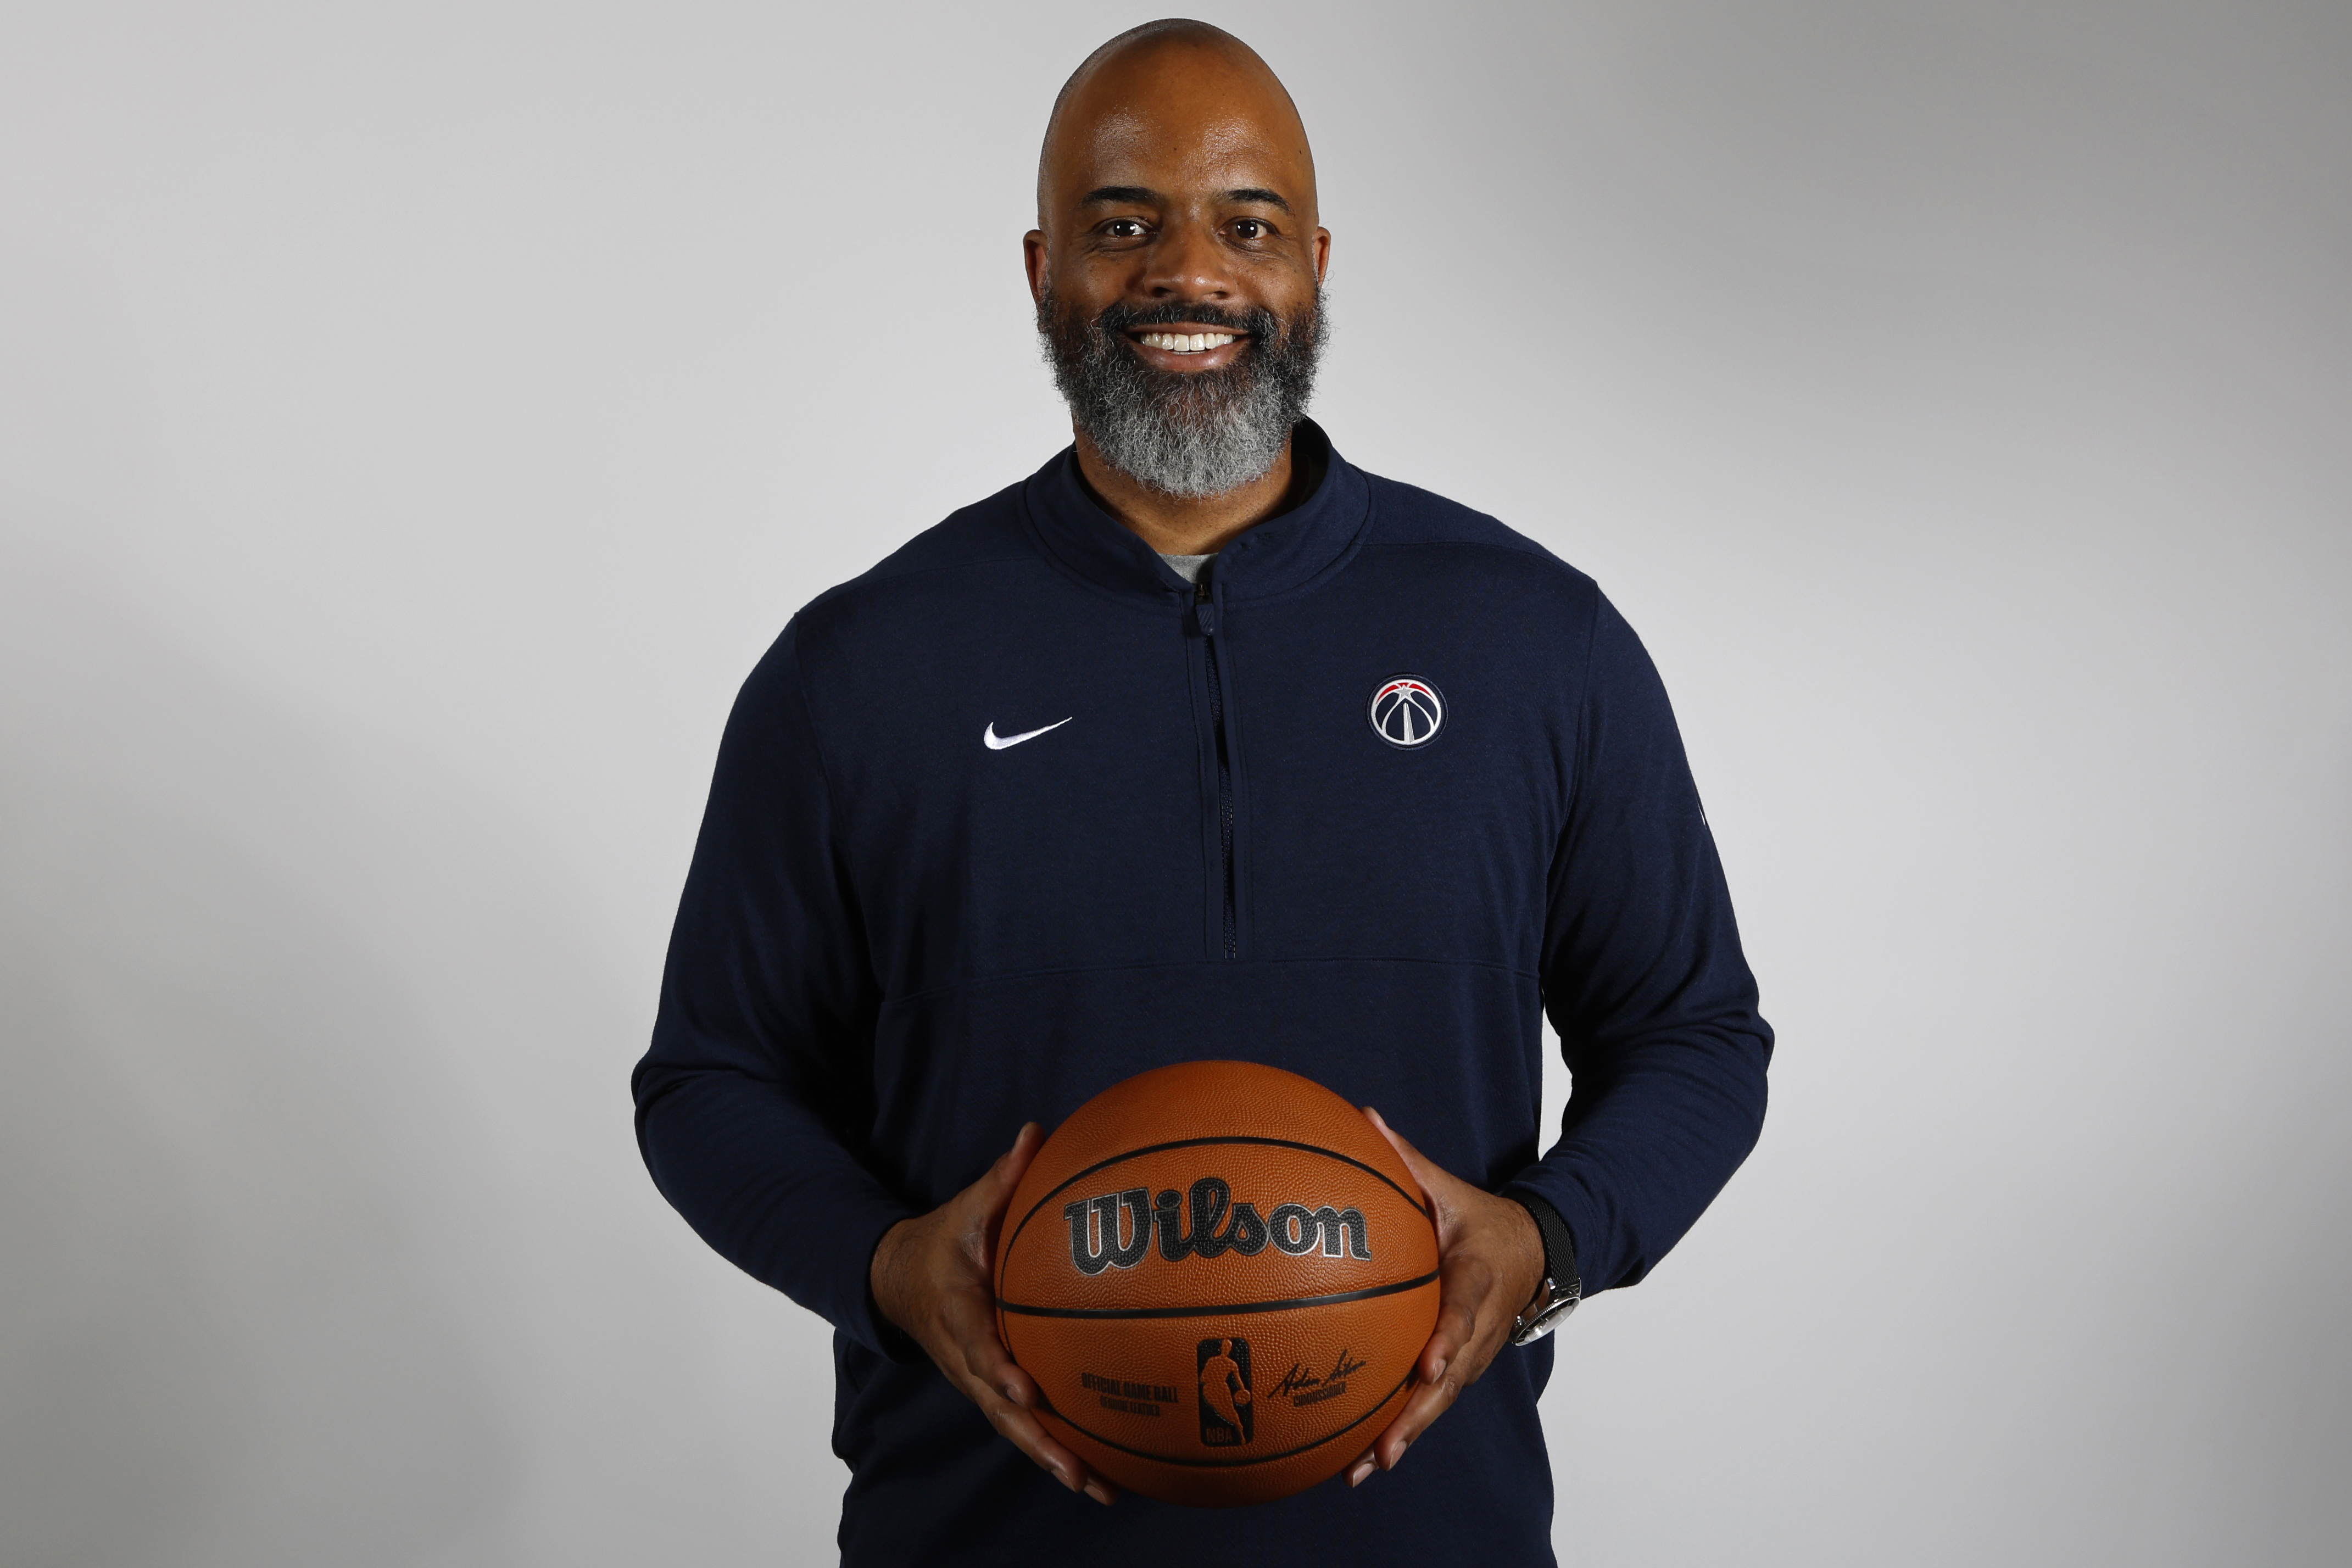 New Wizards coach Wes Unseld Jr. is prepared to lead - The Washington Post